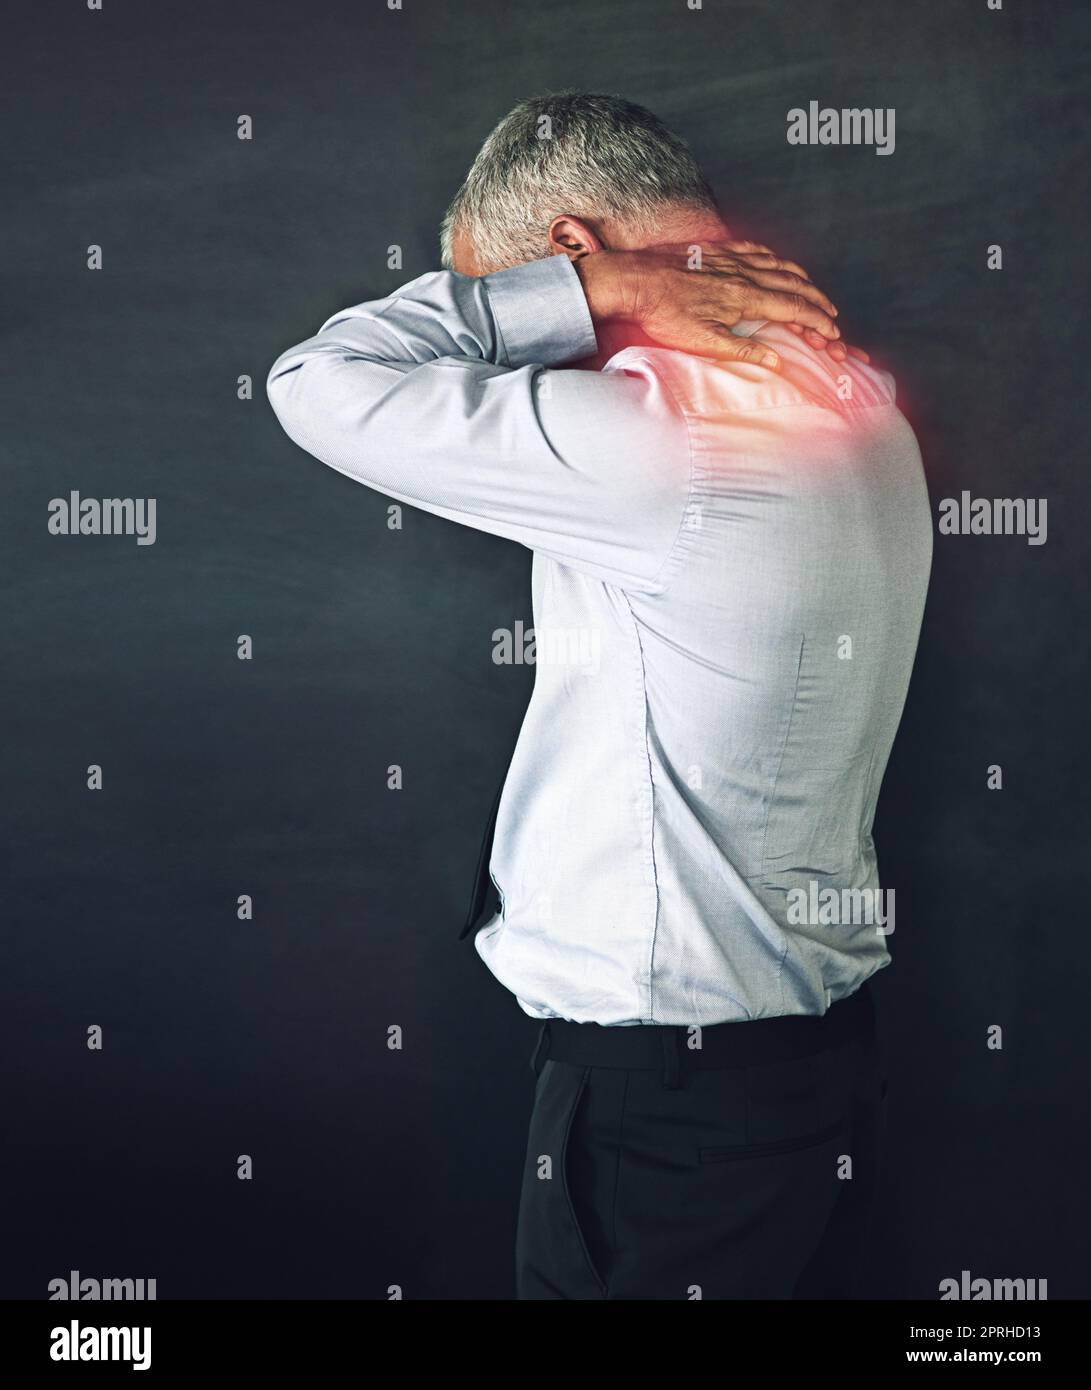 When work stress becomes physical. Studio shot of a mature man experiencing neck ache against a black background. Stock Photo